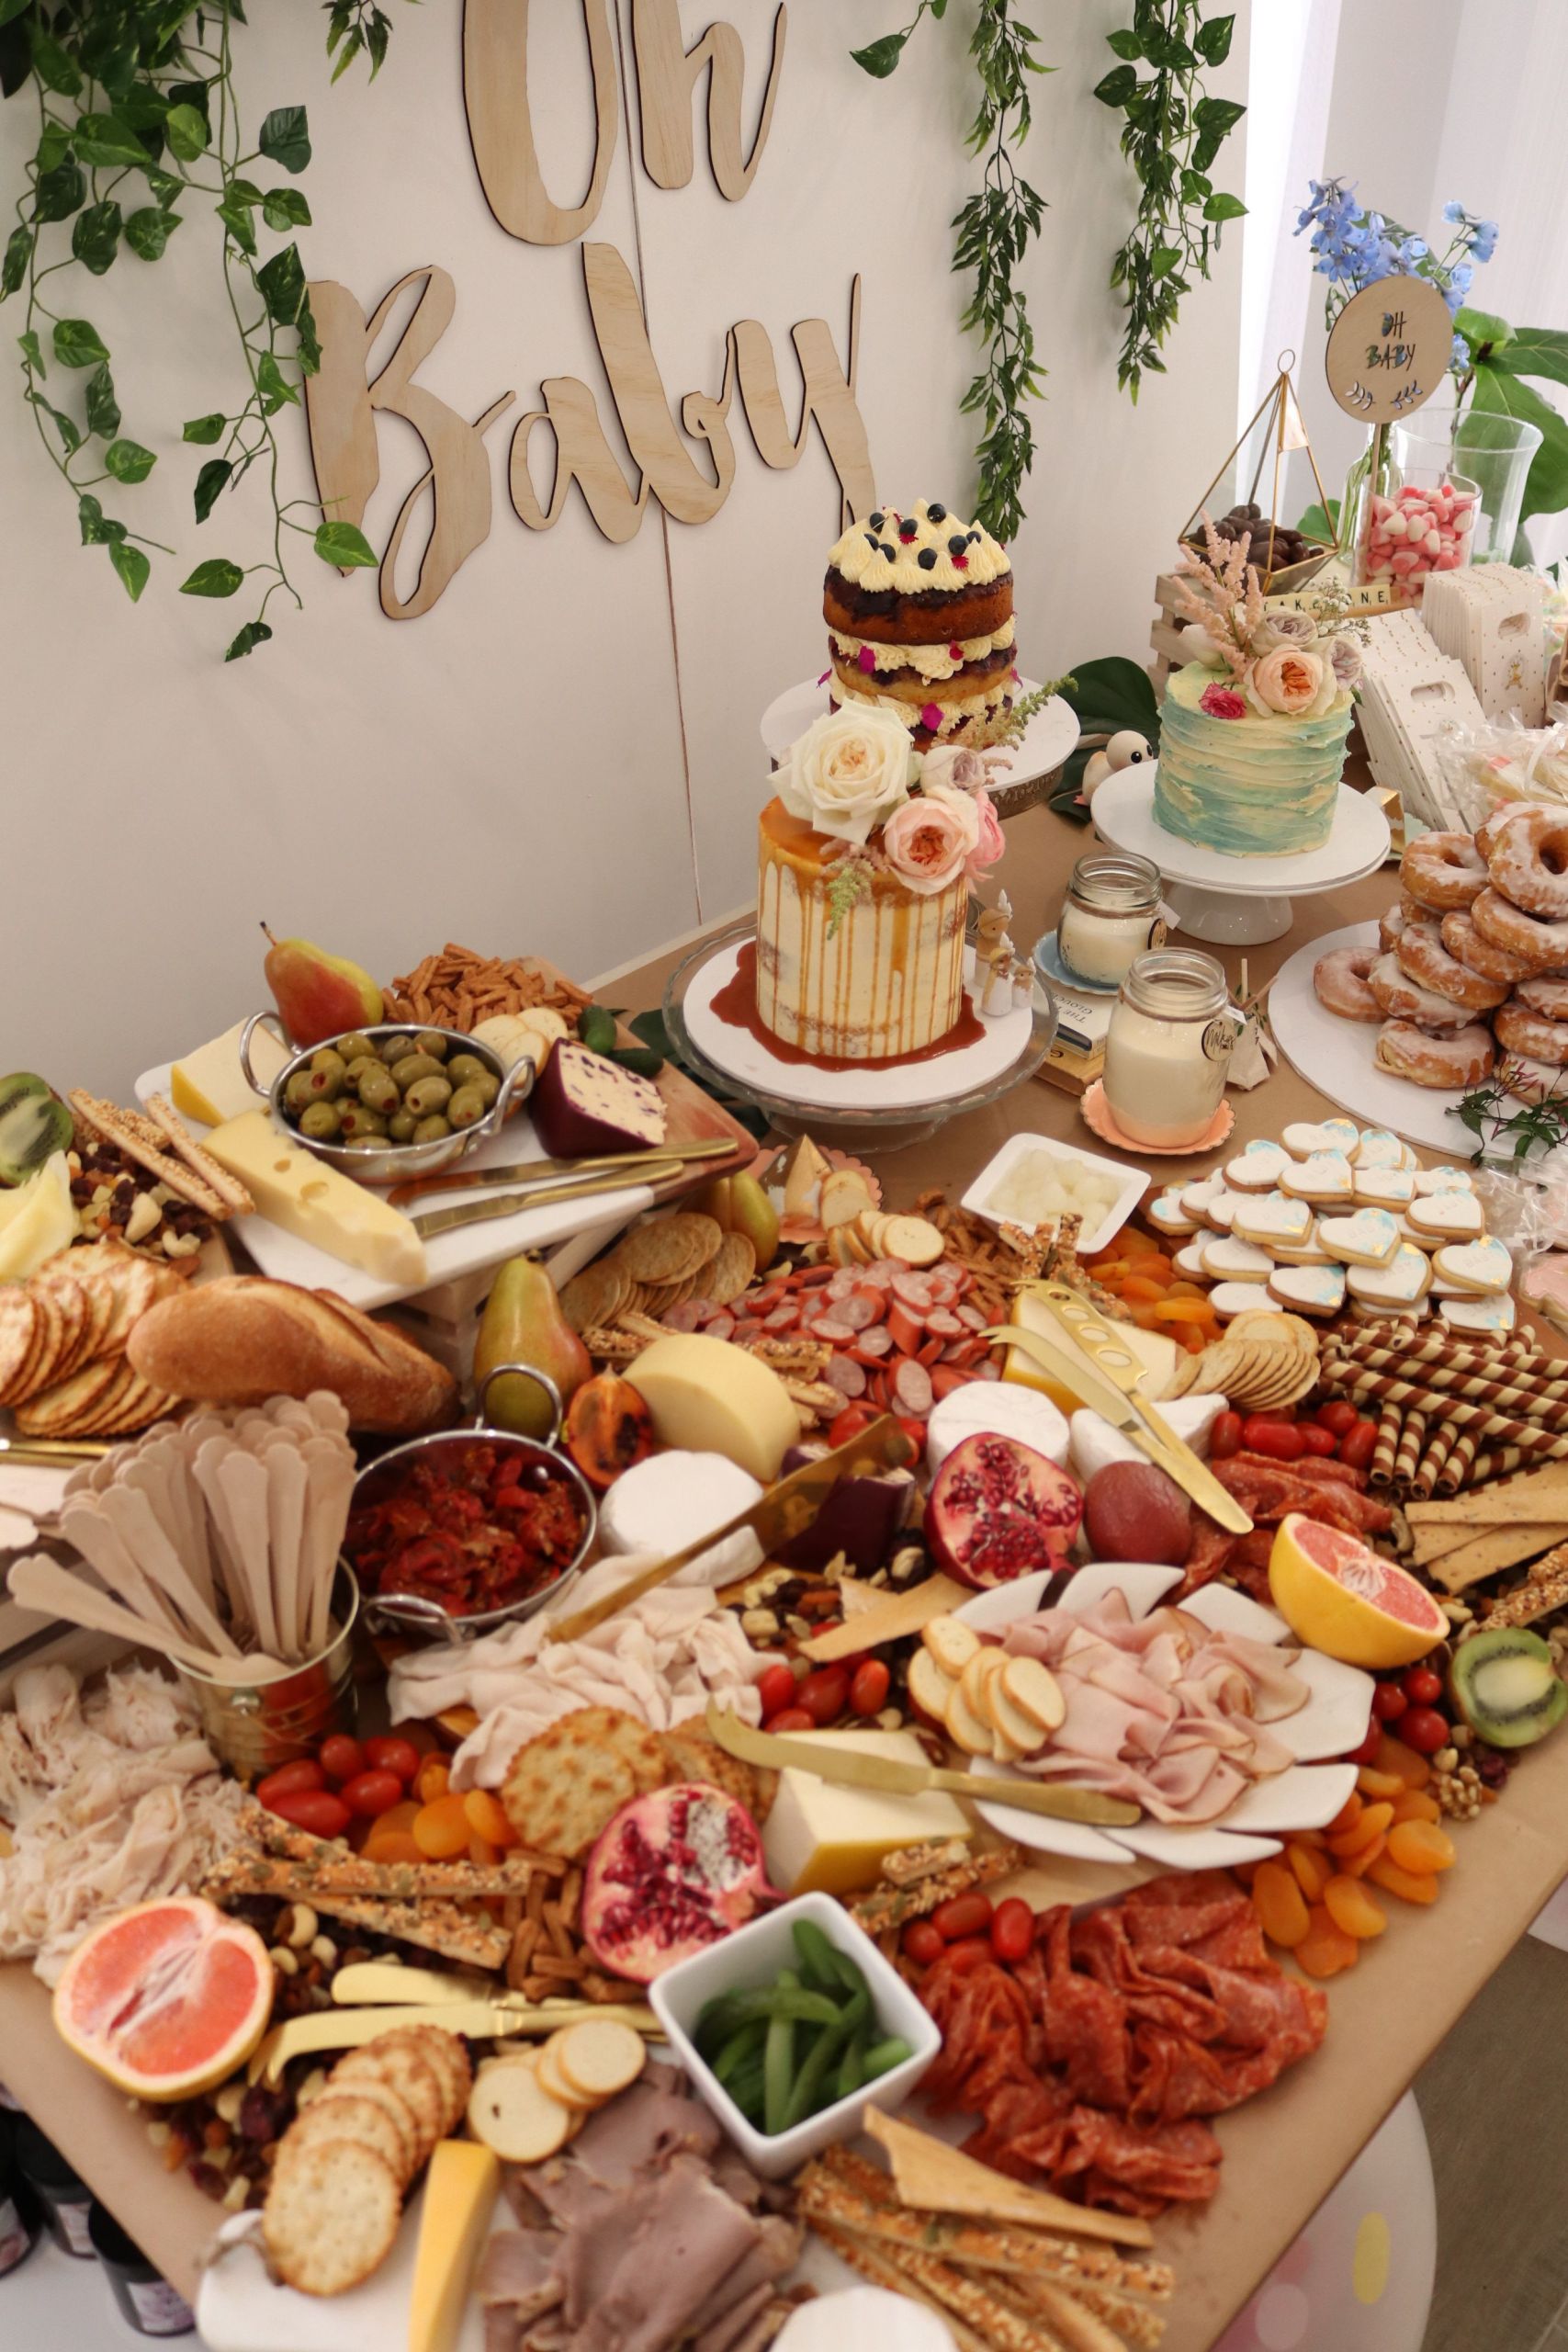 Party Food Table Ideas
 Baby shower grazing table ideas in 2019